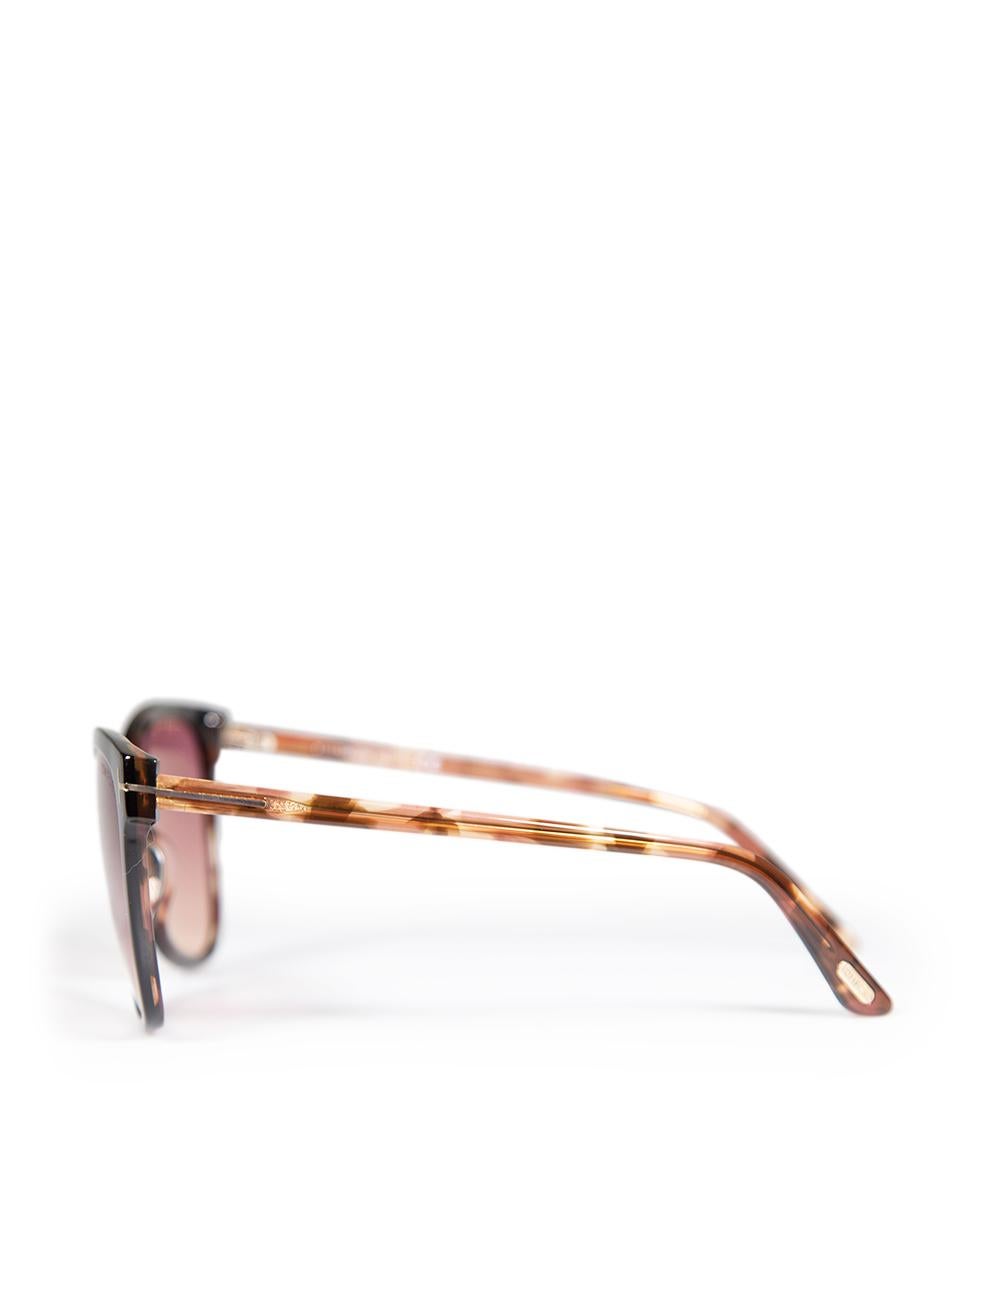 Tom Ford Ani Pink Gradient Cat Eye Sunglasses For Sale 1